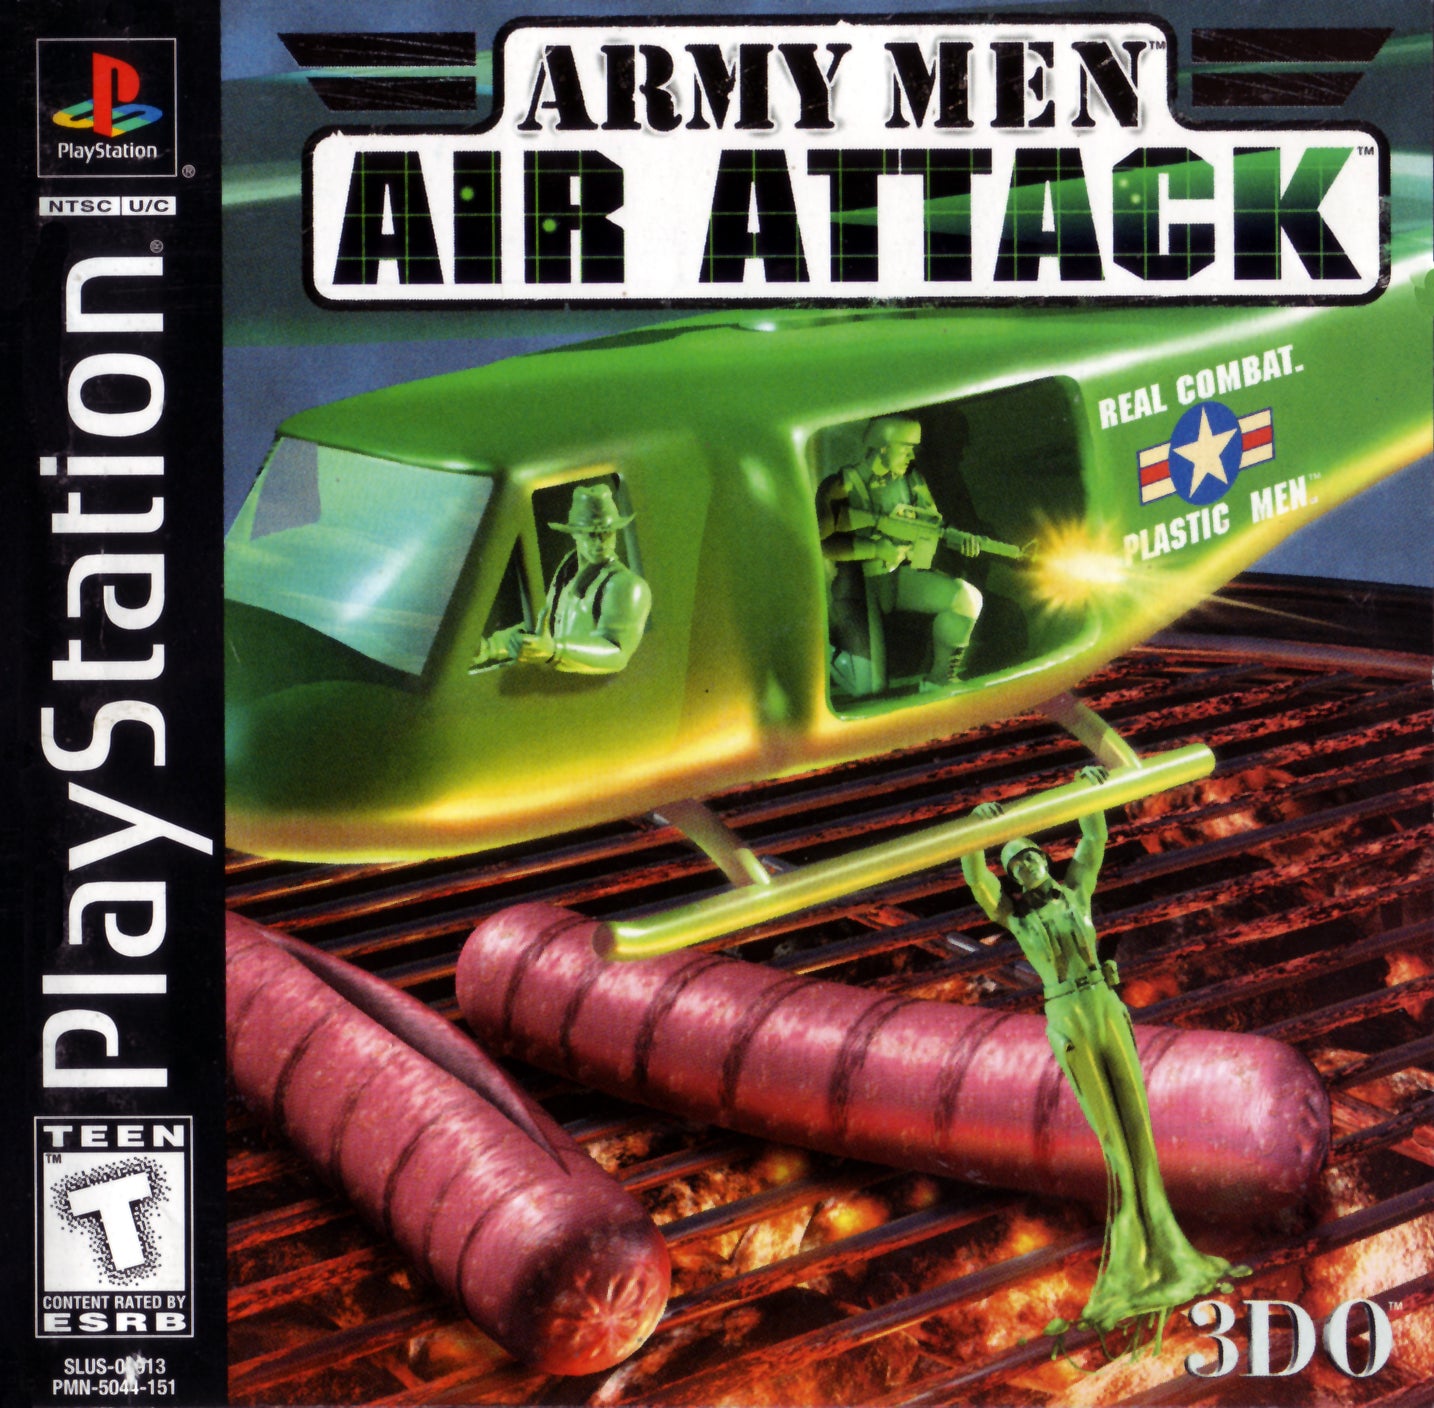 Army Men: Air Attack - PlayStation 1 (PS1) Game - YourGamingShop.com - Buy, Sell, Trade Video Games Online. 120 Day Warranty. Satisfaction Guaranteed.